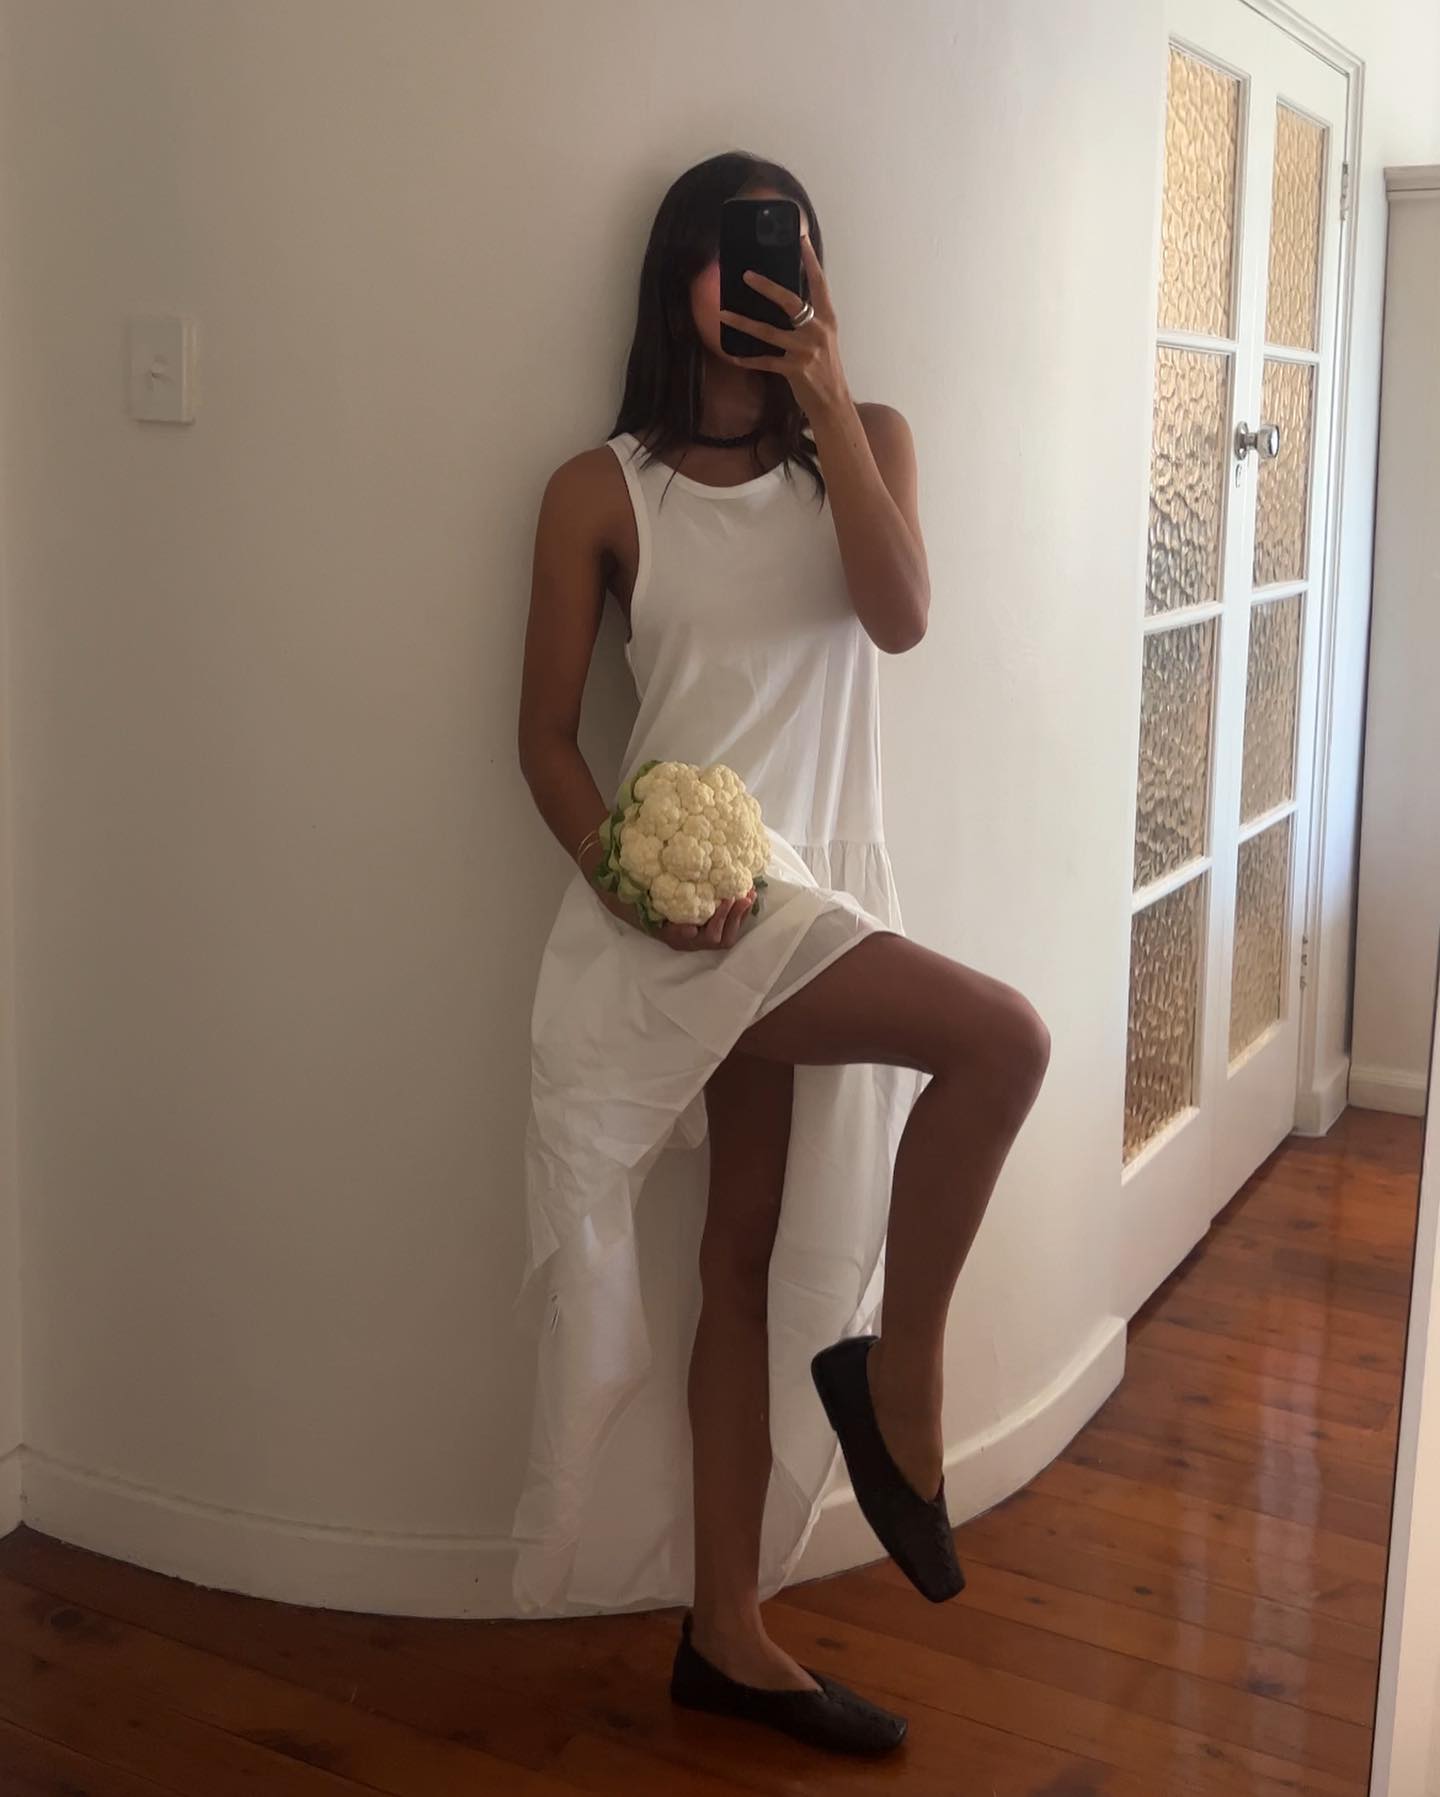 woman wearing white mixed media tank dress with poplin skirt, black square-toe flats, holding a cauliflower against white wall